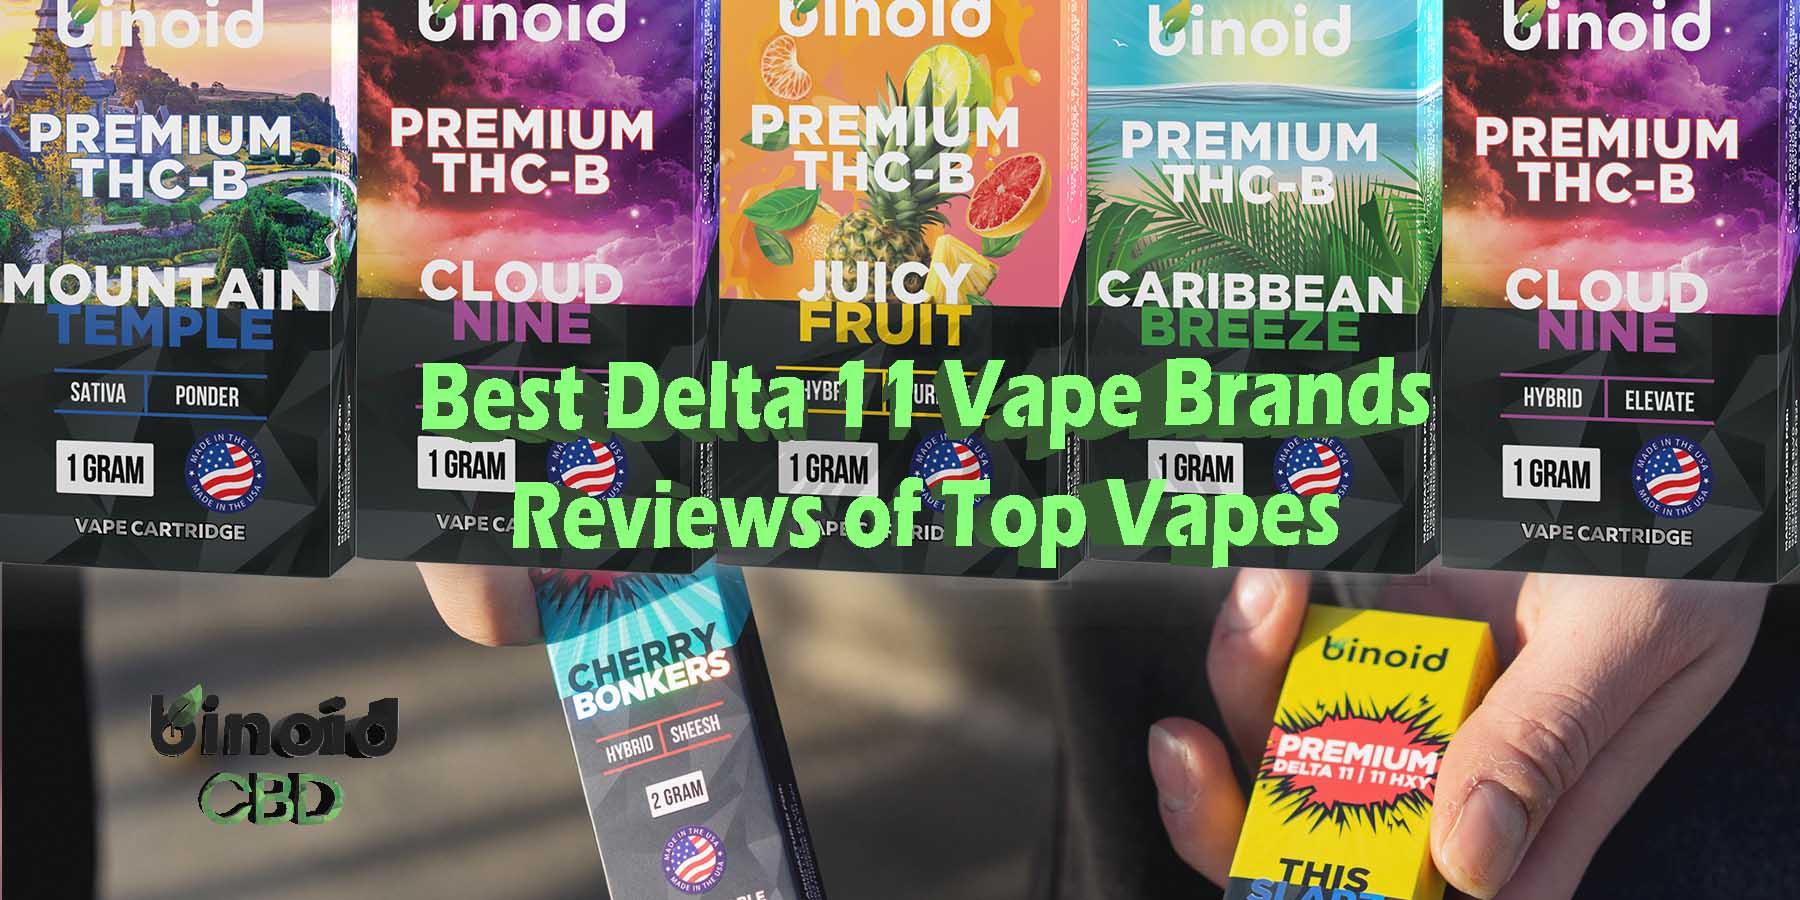 Best Delta 11 Vape Brands Reviews of Top Vapes Best Disposable Vape 2 Gram Review Gram Review Take Work Online Best Brand Price Get Near Me Lowest Coupon Discount Store Shop